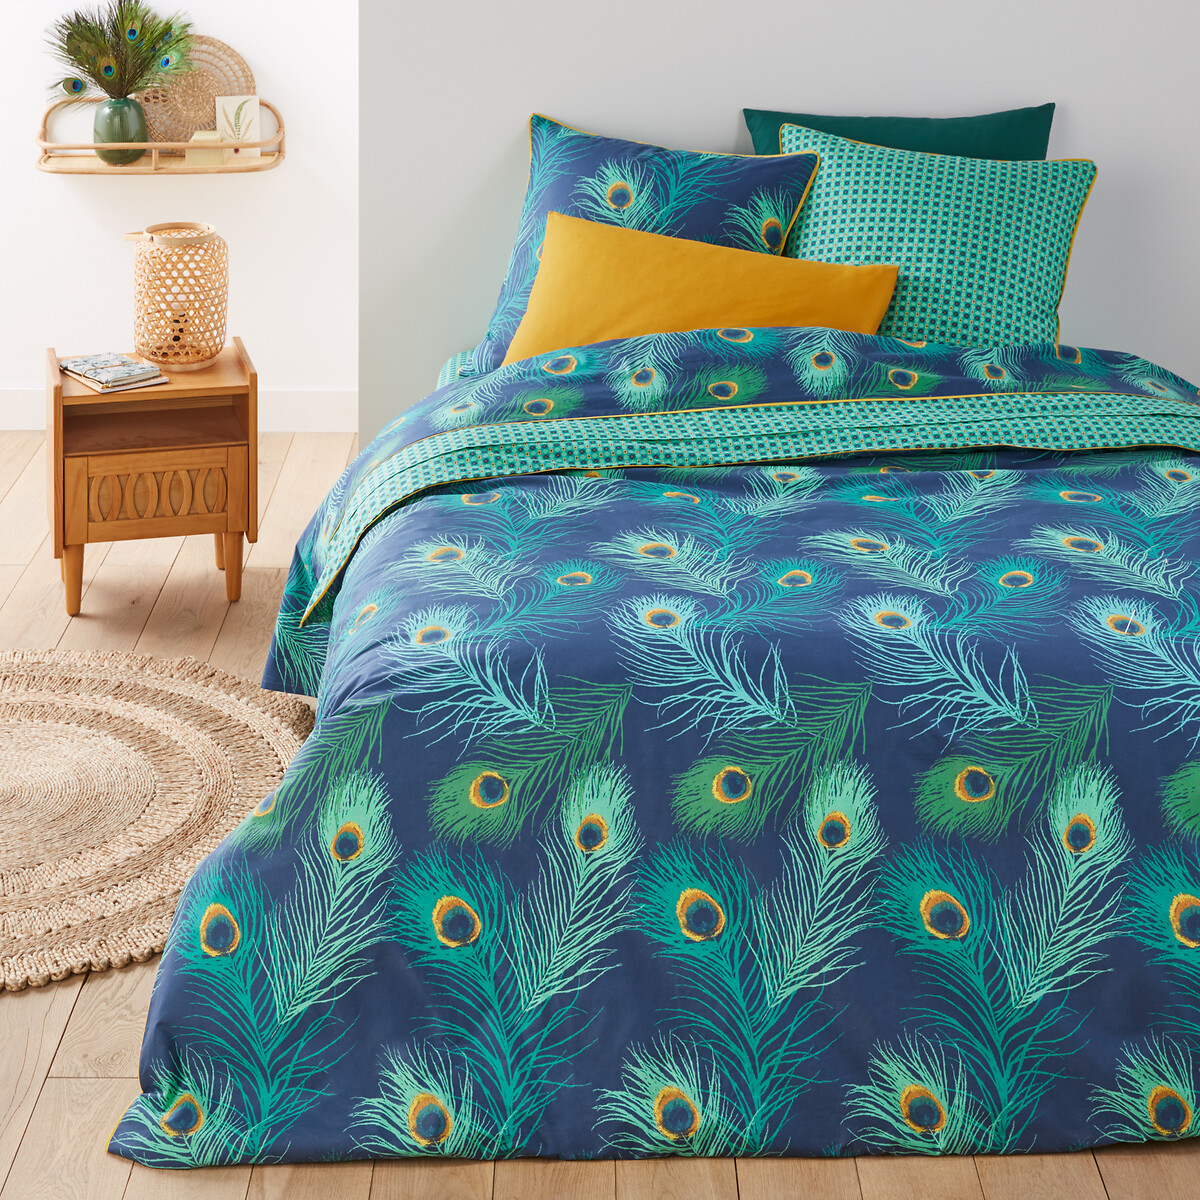 Shakhra Pea Print Cotton Percale, Teal Brushed Cotton Duvet Cover